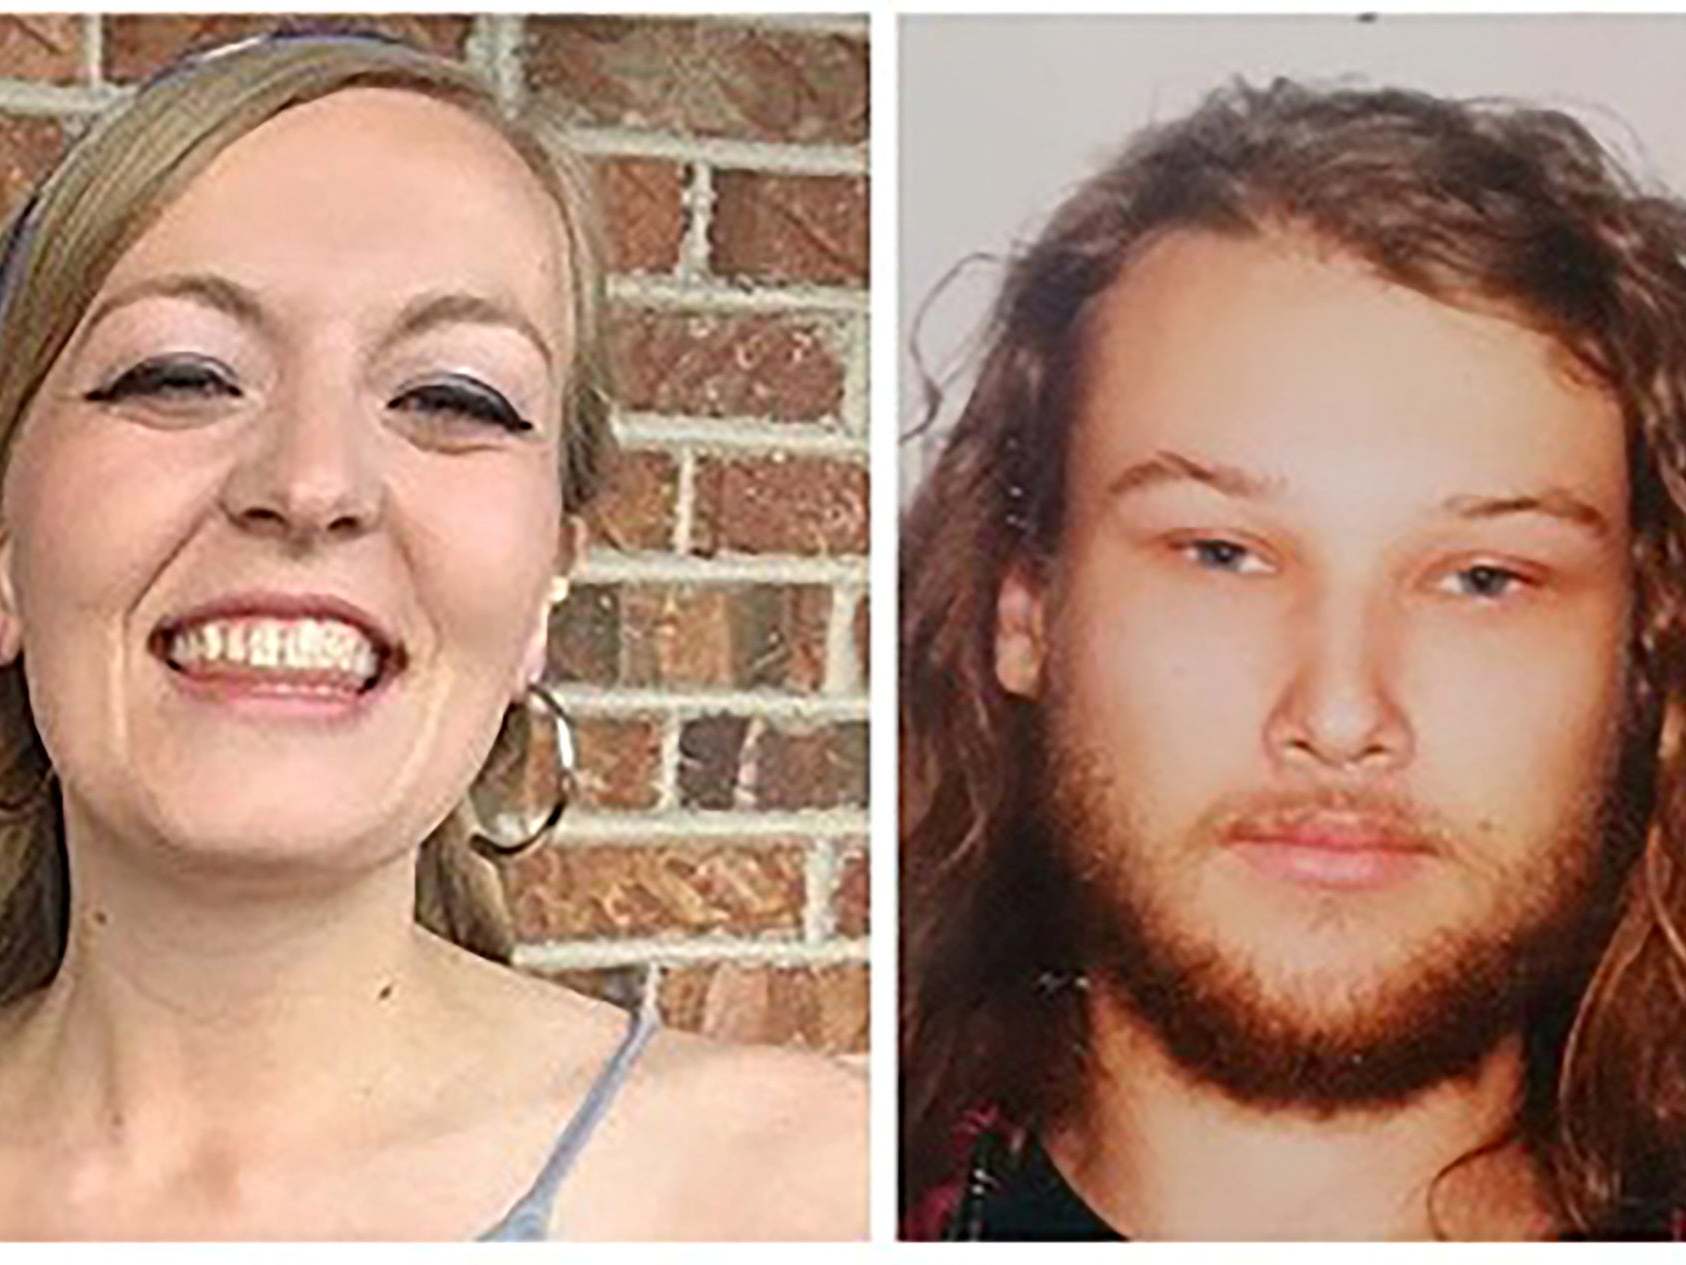 Chynna Deese, 24, and her boyfriend Lucas Fowler, 23, were found dead on 15 July (Reuters)